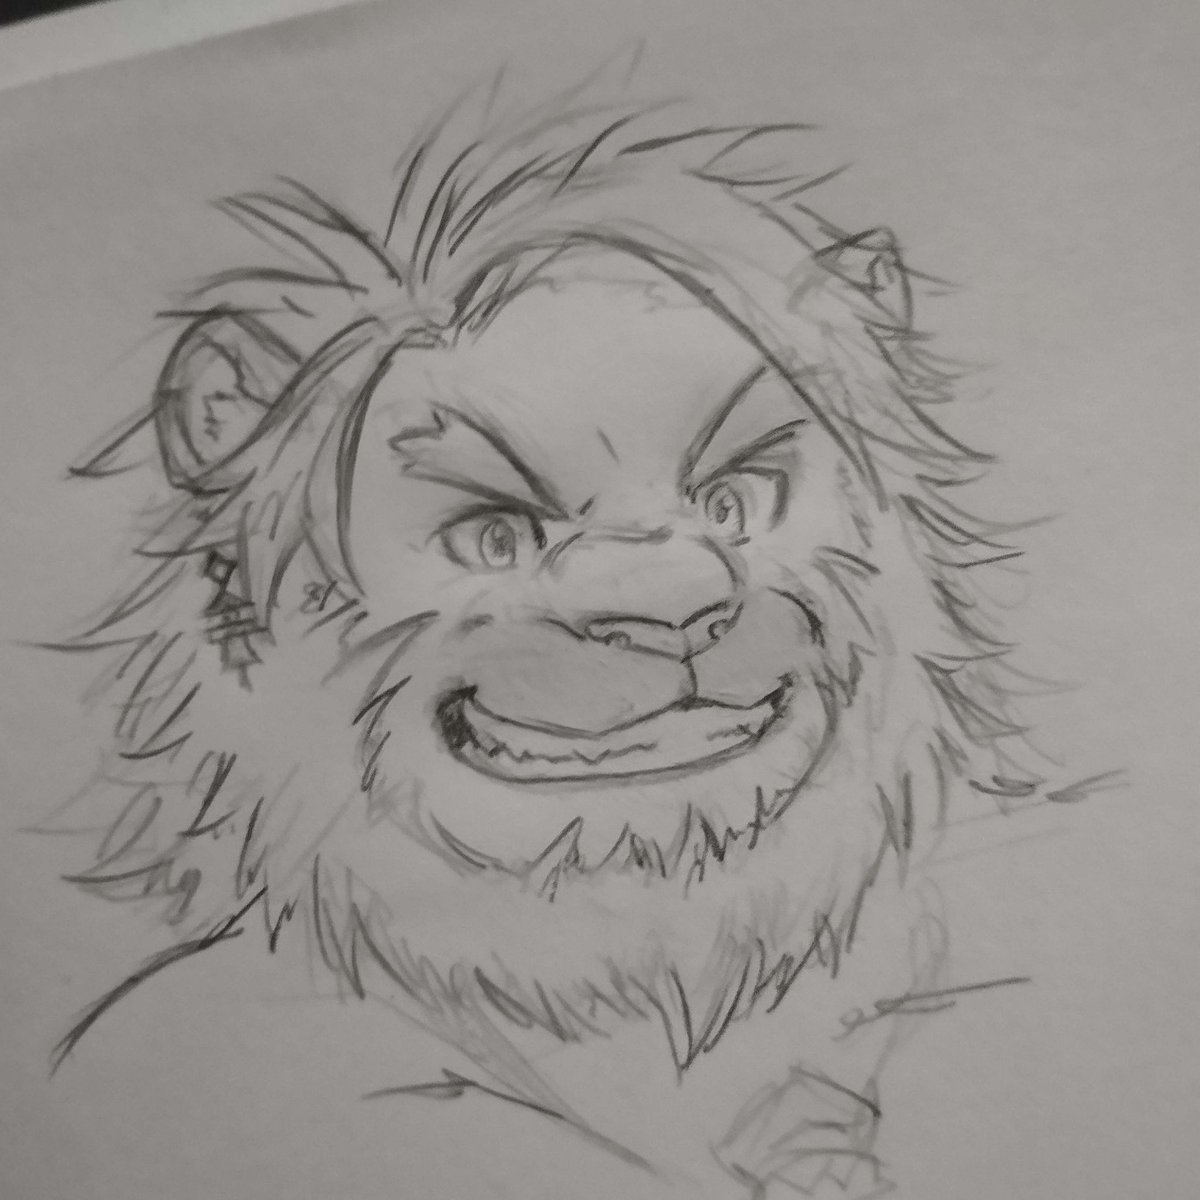 Zo's grin is so much fun to draw.
#housamo 
#tokyoafterschoolsummoners 
#放サモファンアート
#放サモ